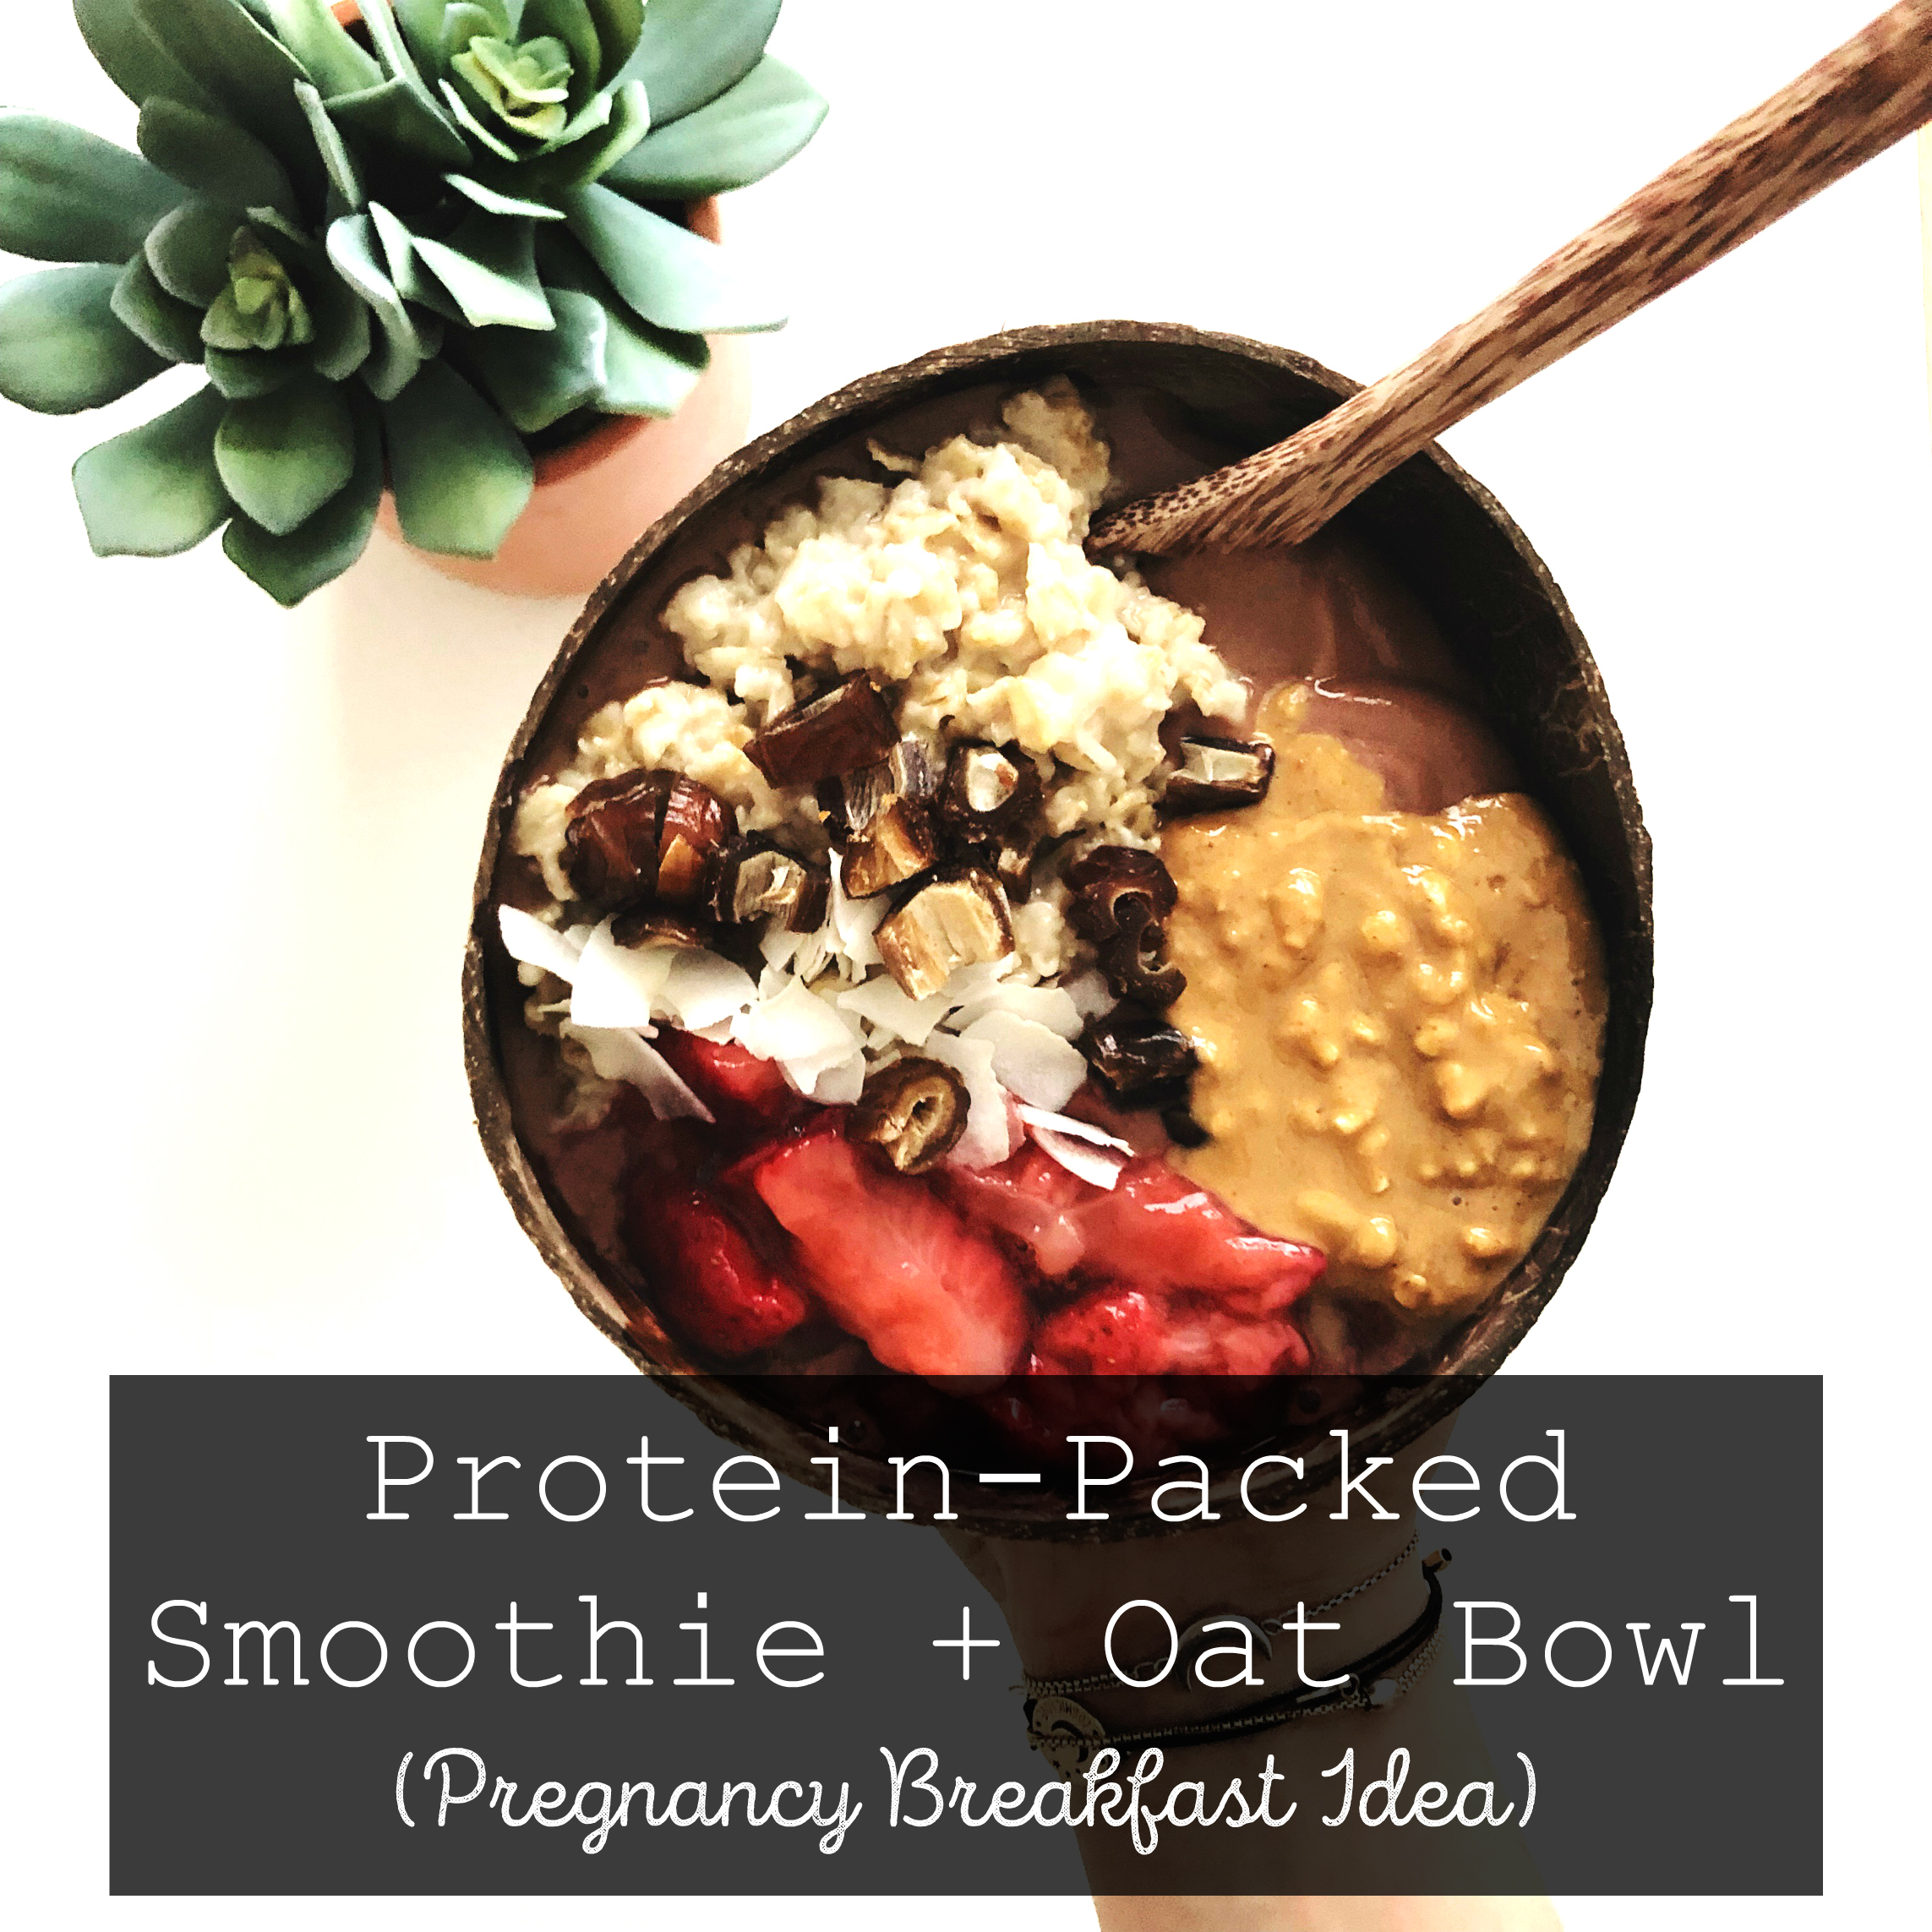 Protein-Packed Smoothie + Oat Bowl (Pregnancy Breakfast Idea)